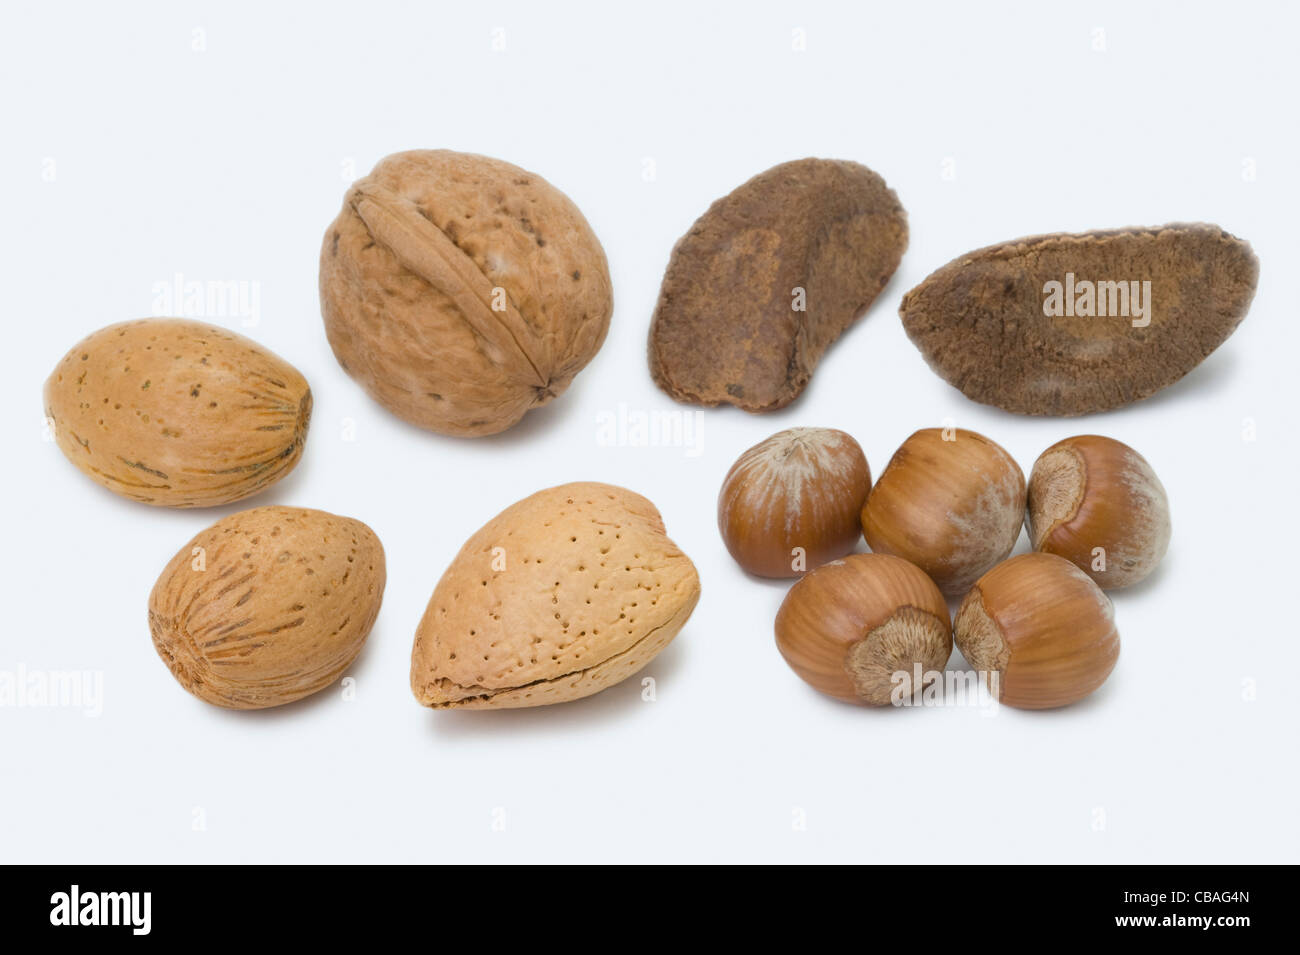 a selection of nuts in their shells including: almond, brazil, walnut, hazel nut Stock Photo